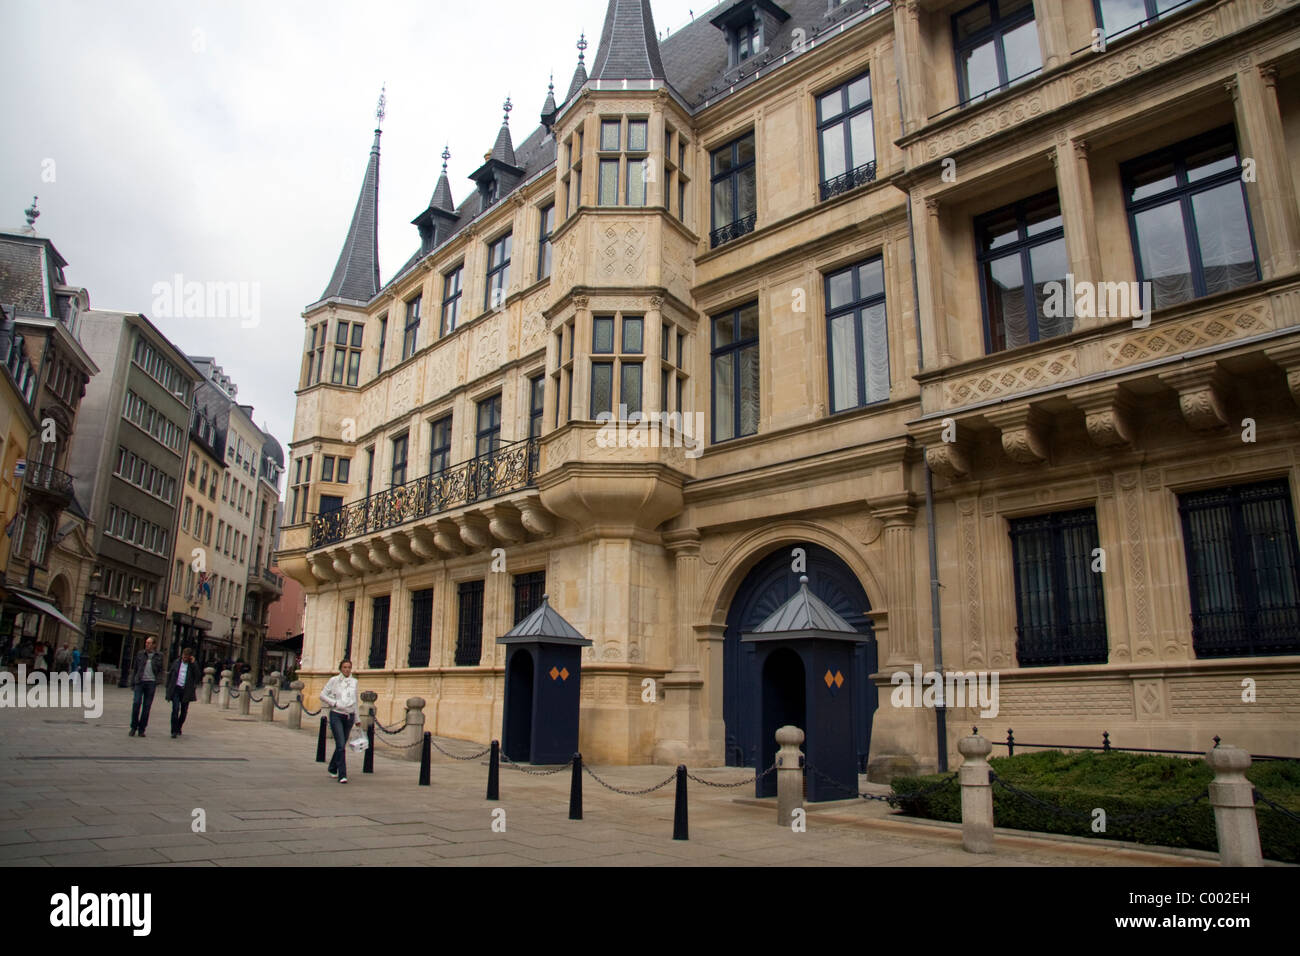 The Grand Ducal Palace in Luxembourg City, Luxembourg. Stock Photo